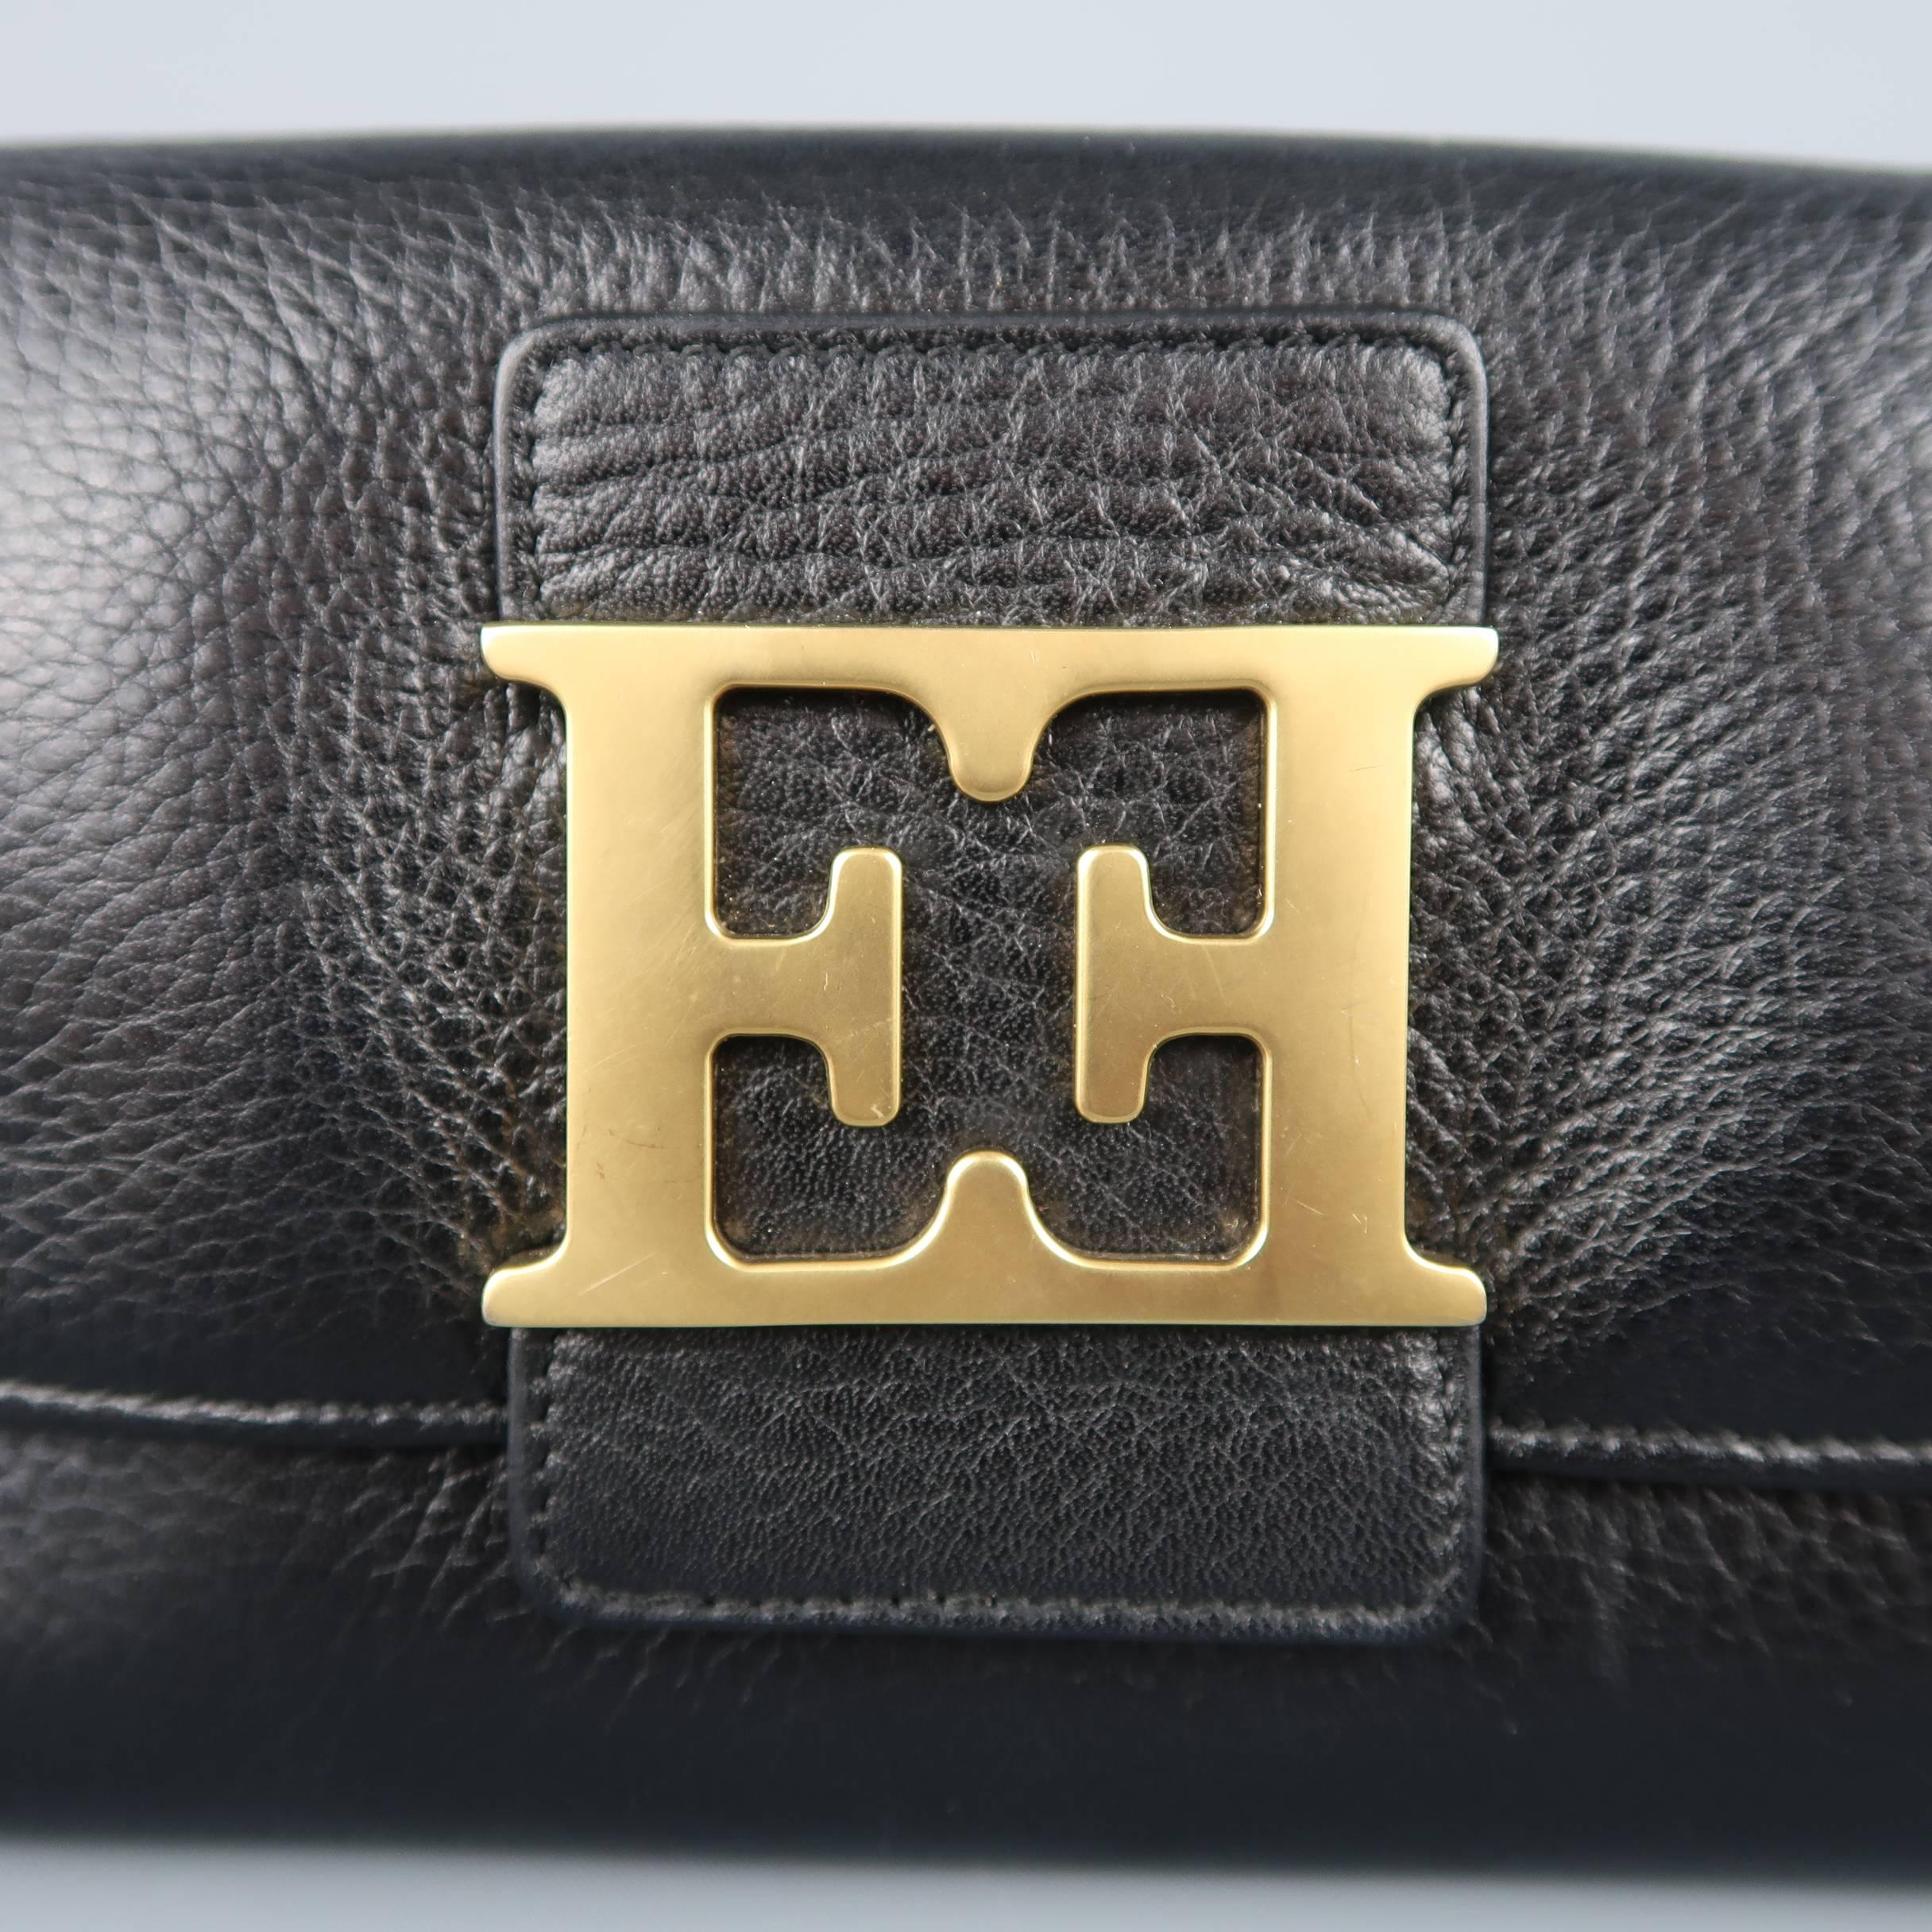 
ESCADA wallet comes in black textured leather with a flap snap closure adorned with an oversized matte gold tone double E logo, internal zip pocket, and multiple compartments. Made in Italy. Good Pre-Owned Condition.
 
Measurements:
Length: 7.25